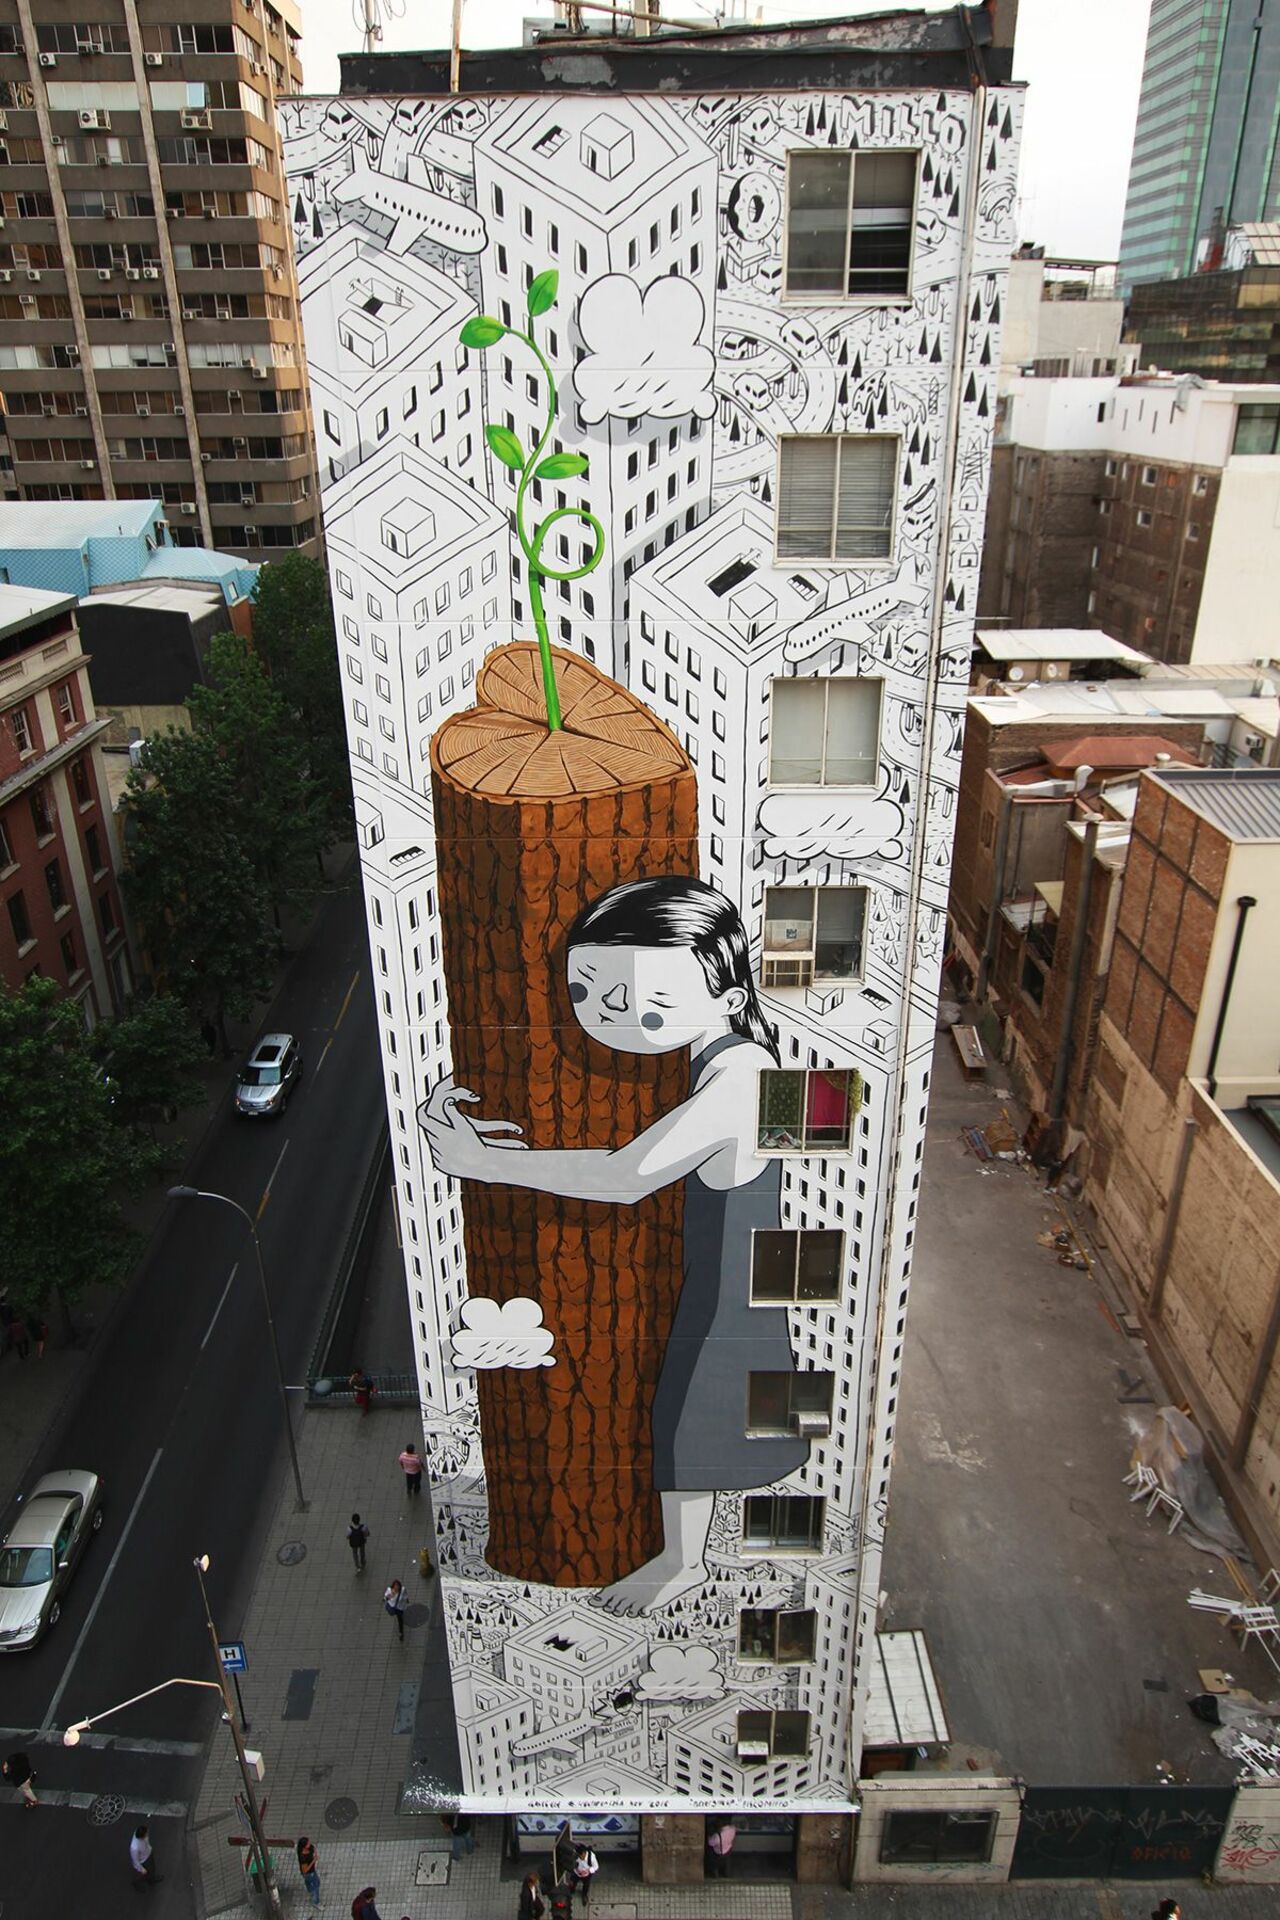 “Never Give Up” by Millo in Santiago, Chile http://buff.ly/2gBHMGh #streetart #mural #graffiti #art https://t.co/TscJ6pAQeM